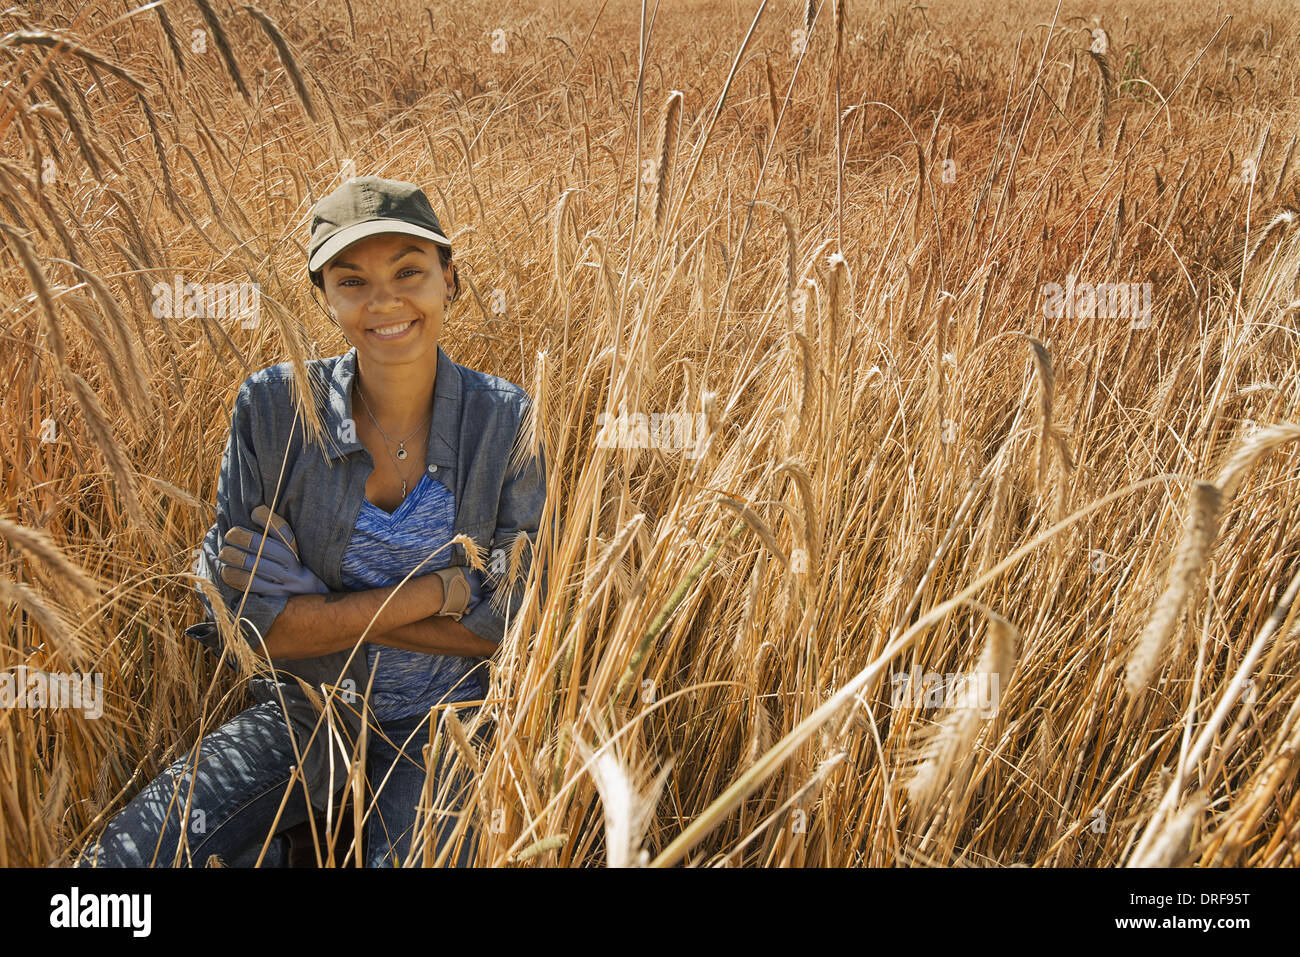 New York state USA woman smiling in field ripening cereal crop corn Stock Photo